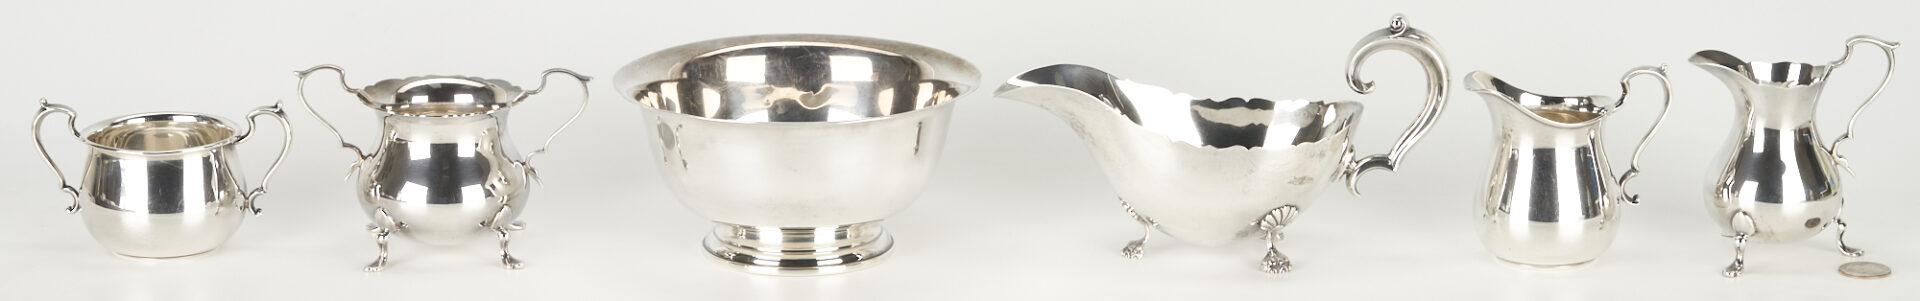 Lot 733: 6 Sterling Silver Hollowware Serving Items